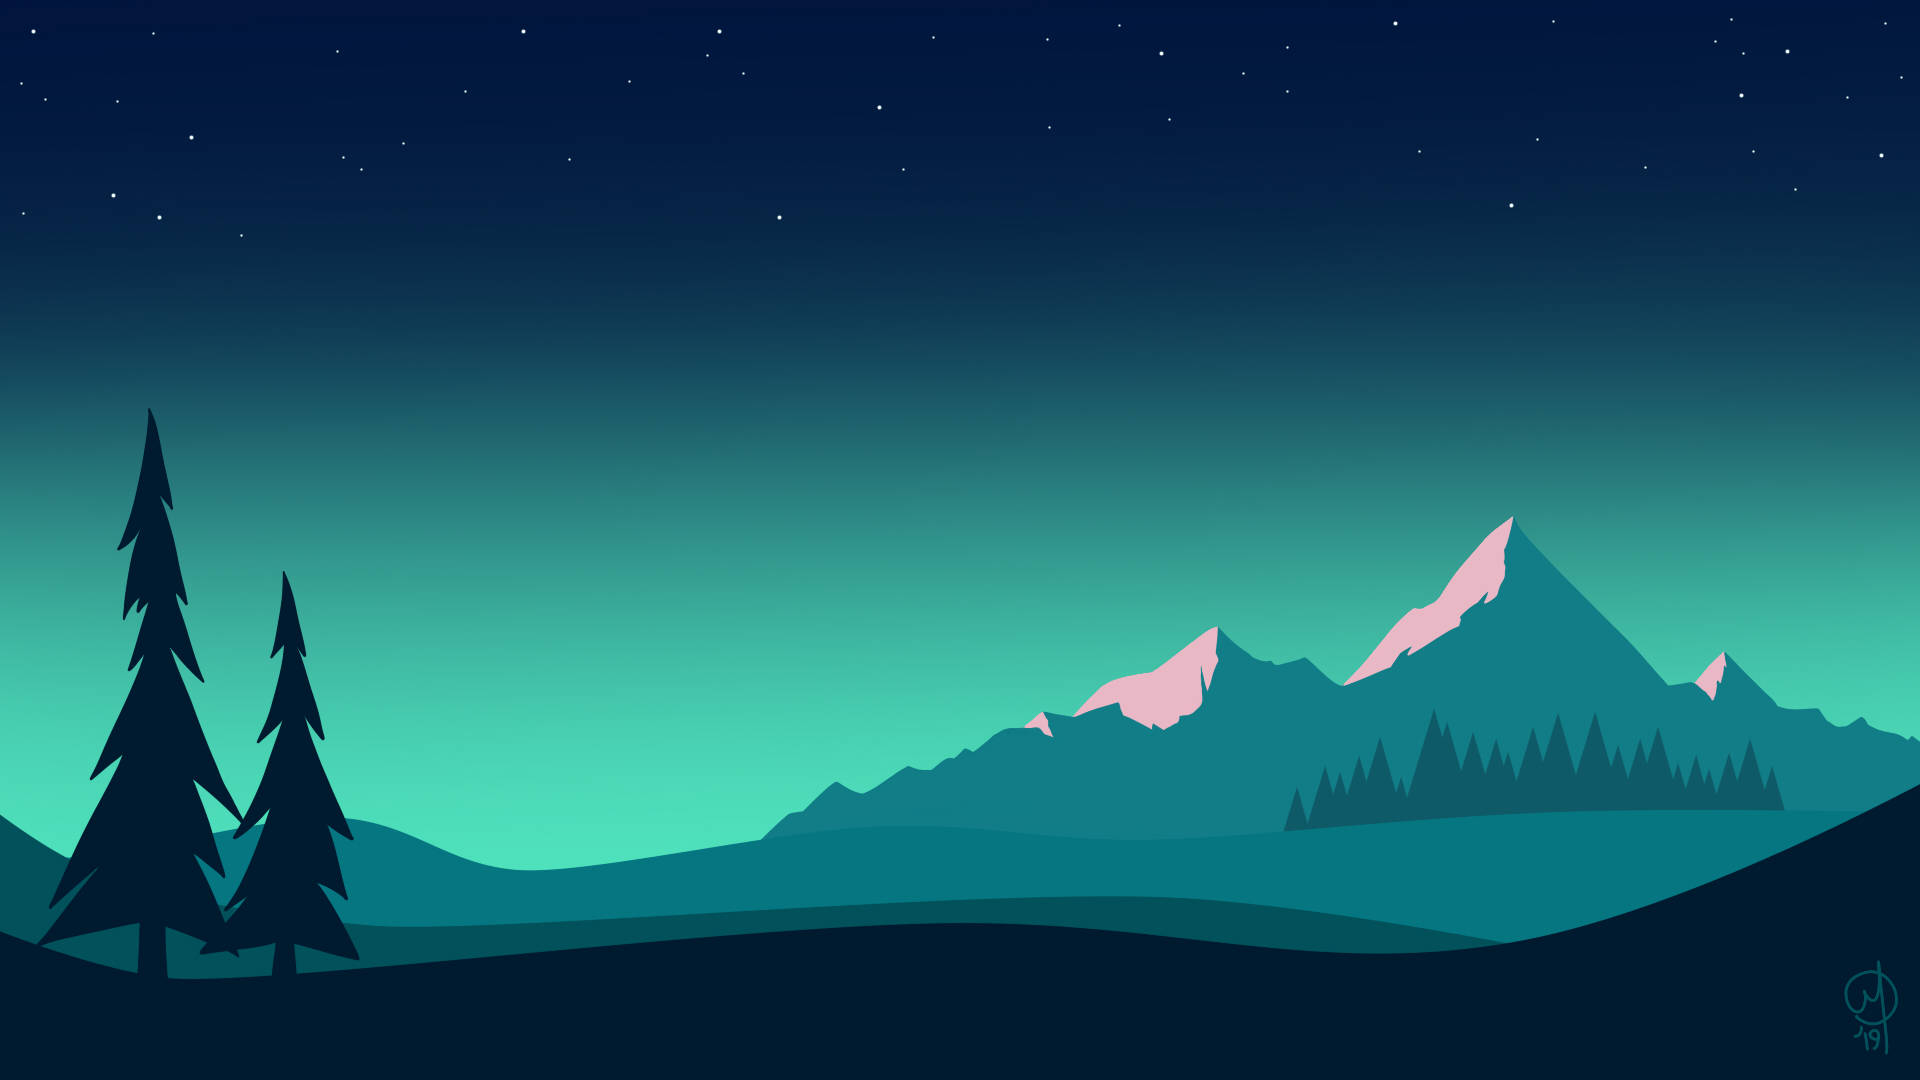 A minimalist night time mountain landscape wallpaper with a green forest and pink mountains - Clean